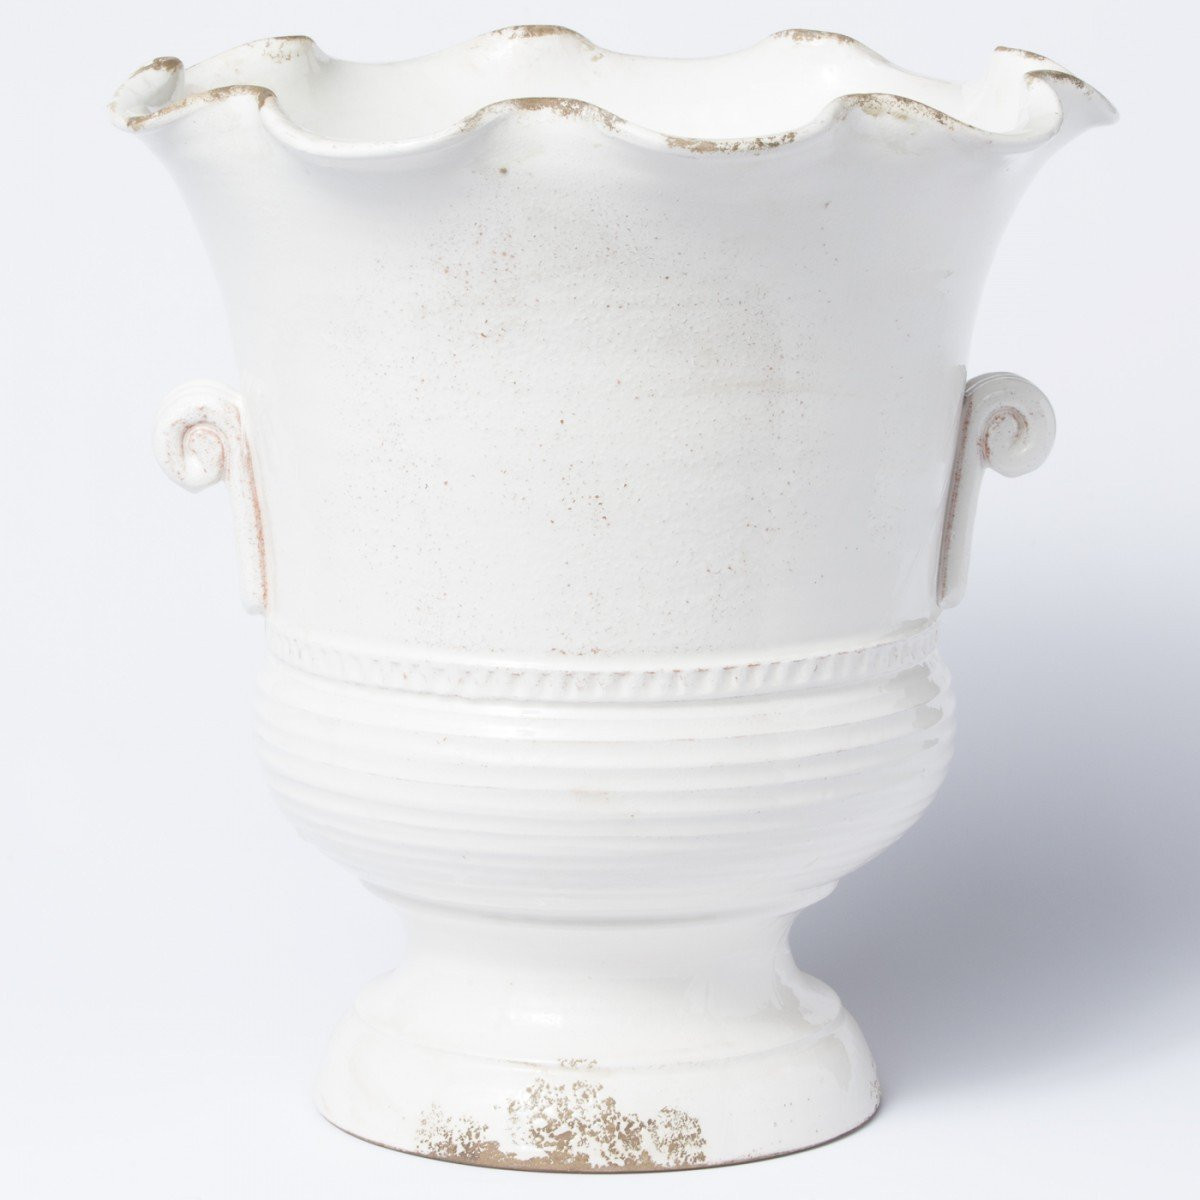 14 Trendy Elegant Expressions by Hosley Vase 2022 free download elegant expressions by hosley vase of rustic garden scalloped footed planter with 74252be8ea25983417301c5005e7ef40